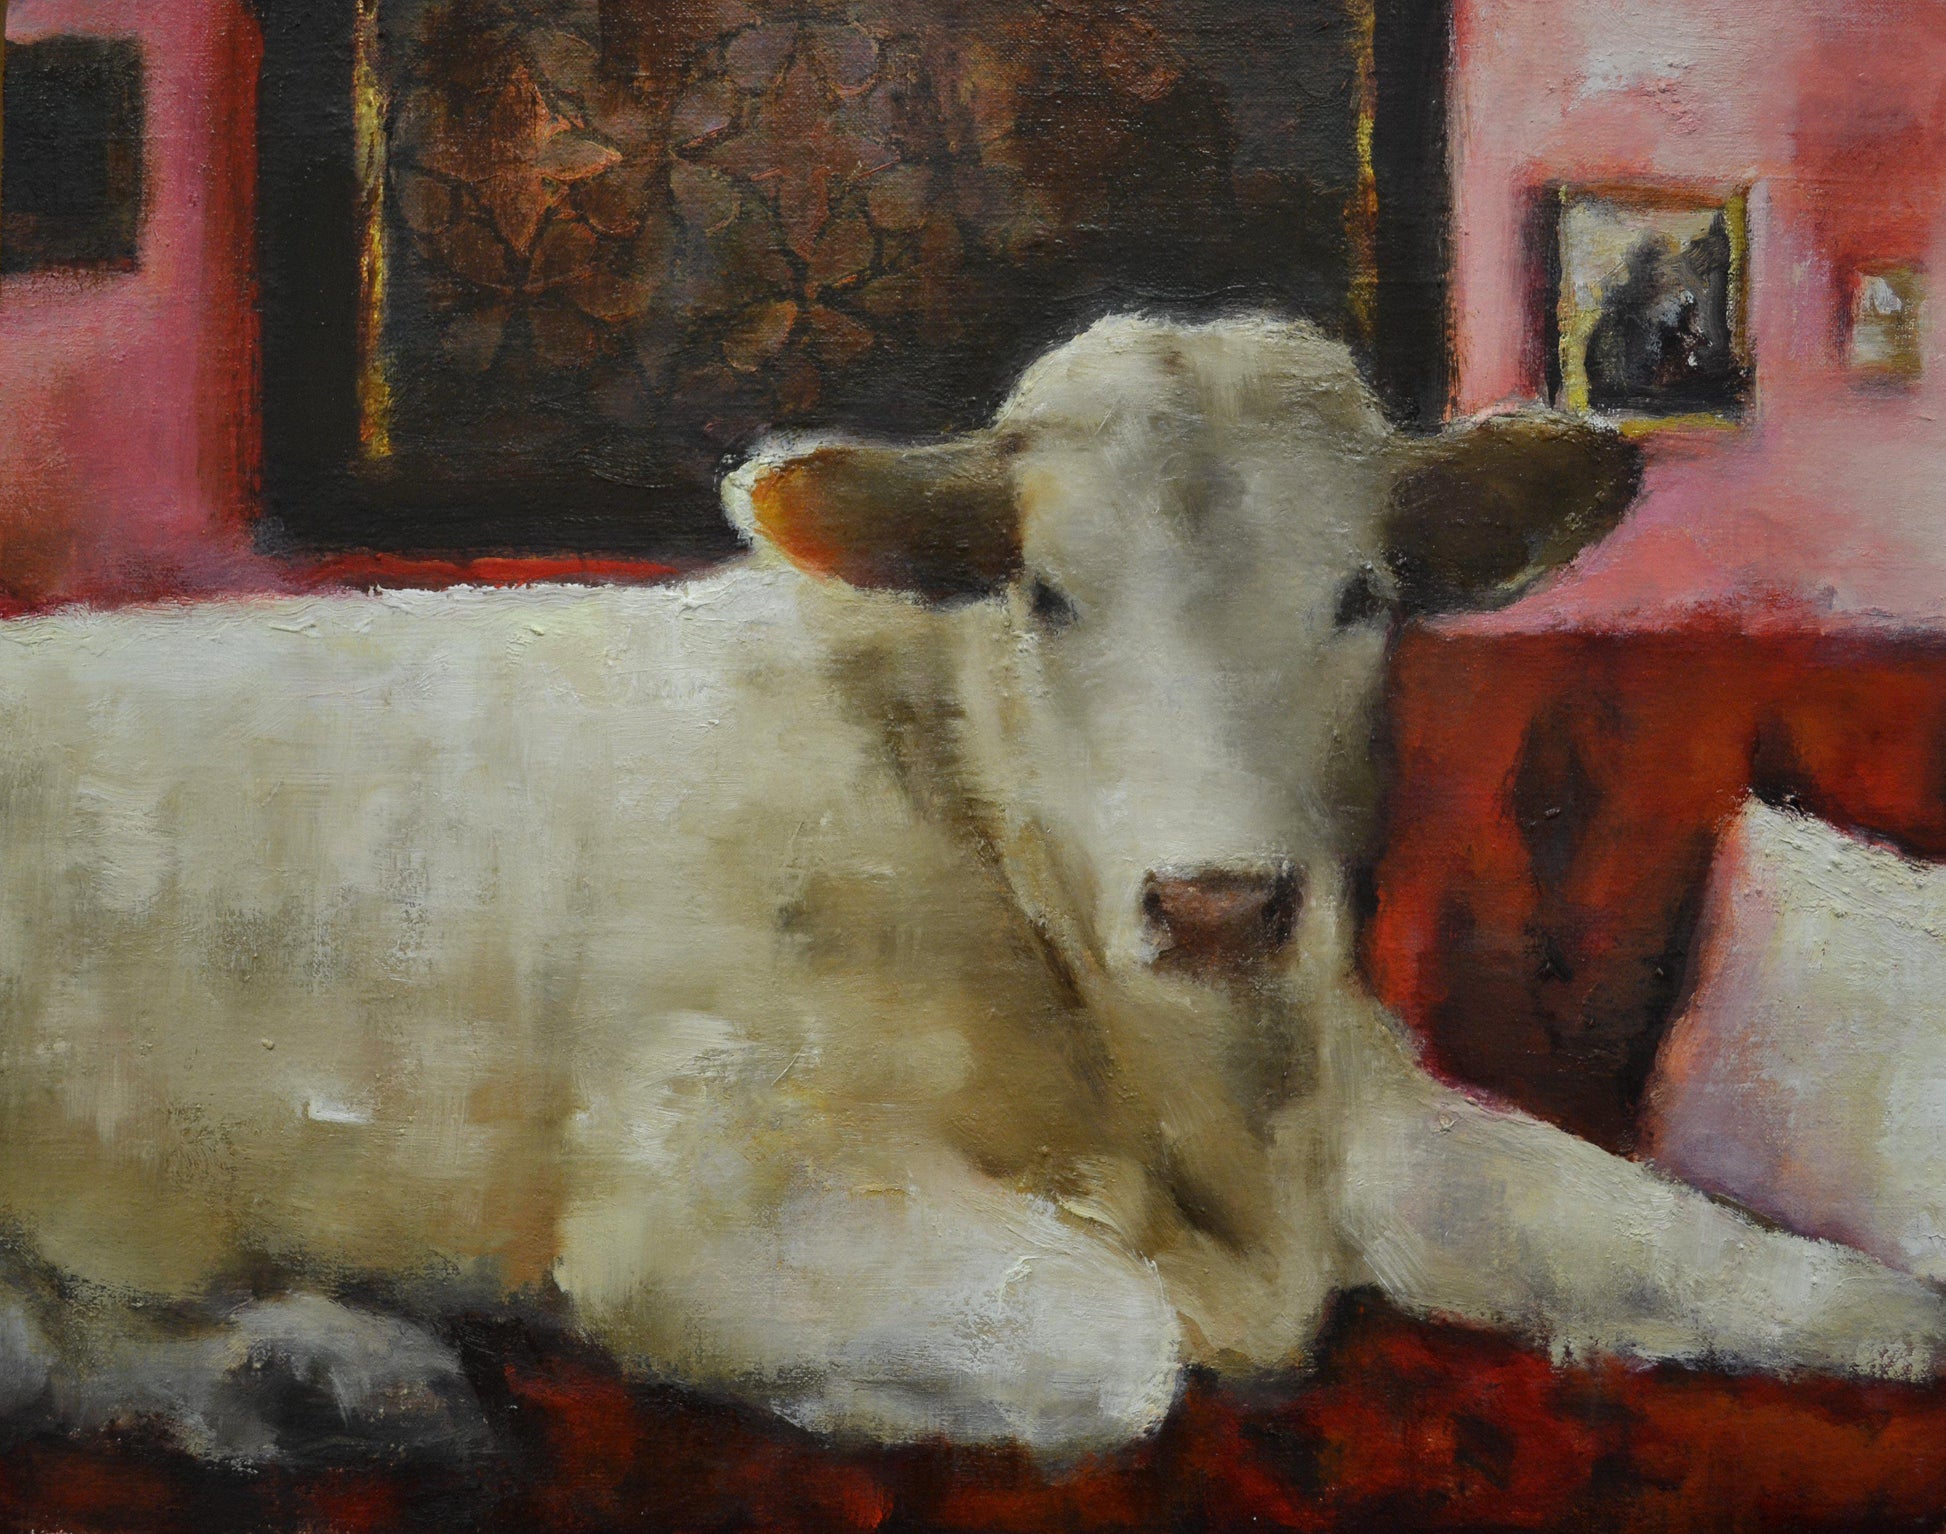 A White Cow laying on a Red sofa.  Whimsical painting by Elsa Sroka.